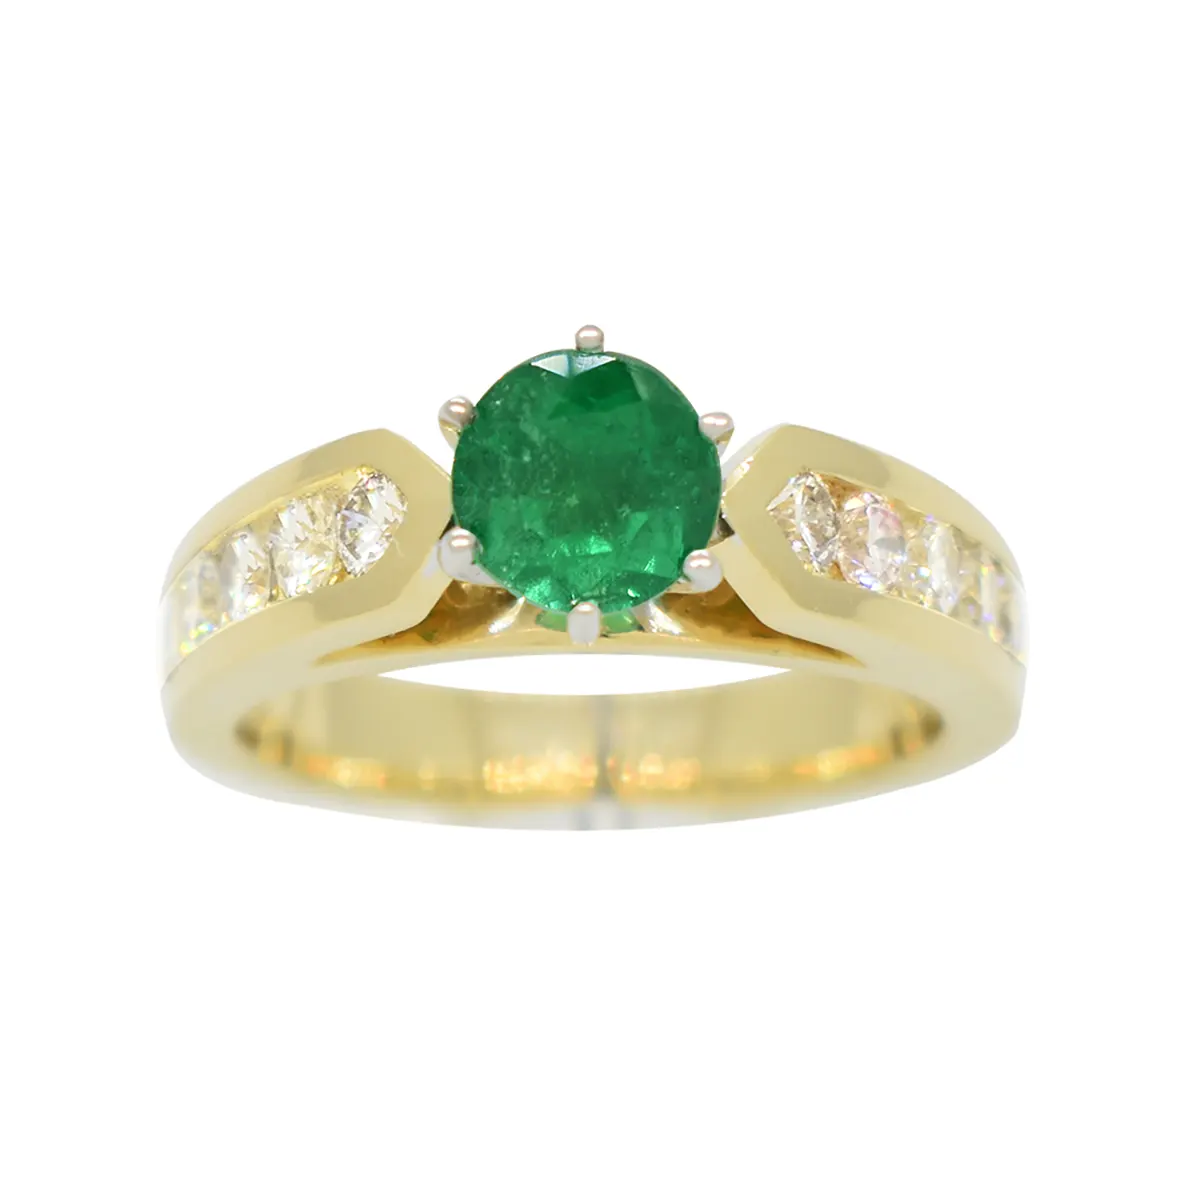 14K_gold_emerald_diamond_ring_cathedral_style.webp